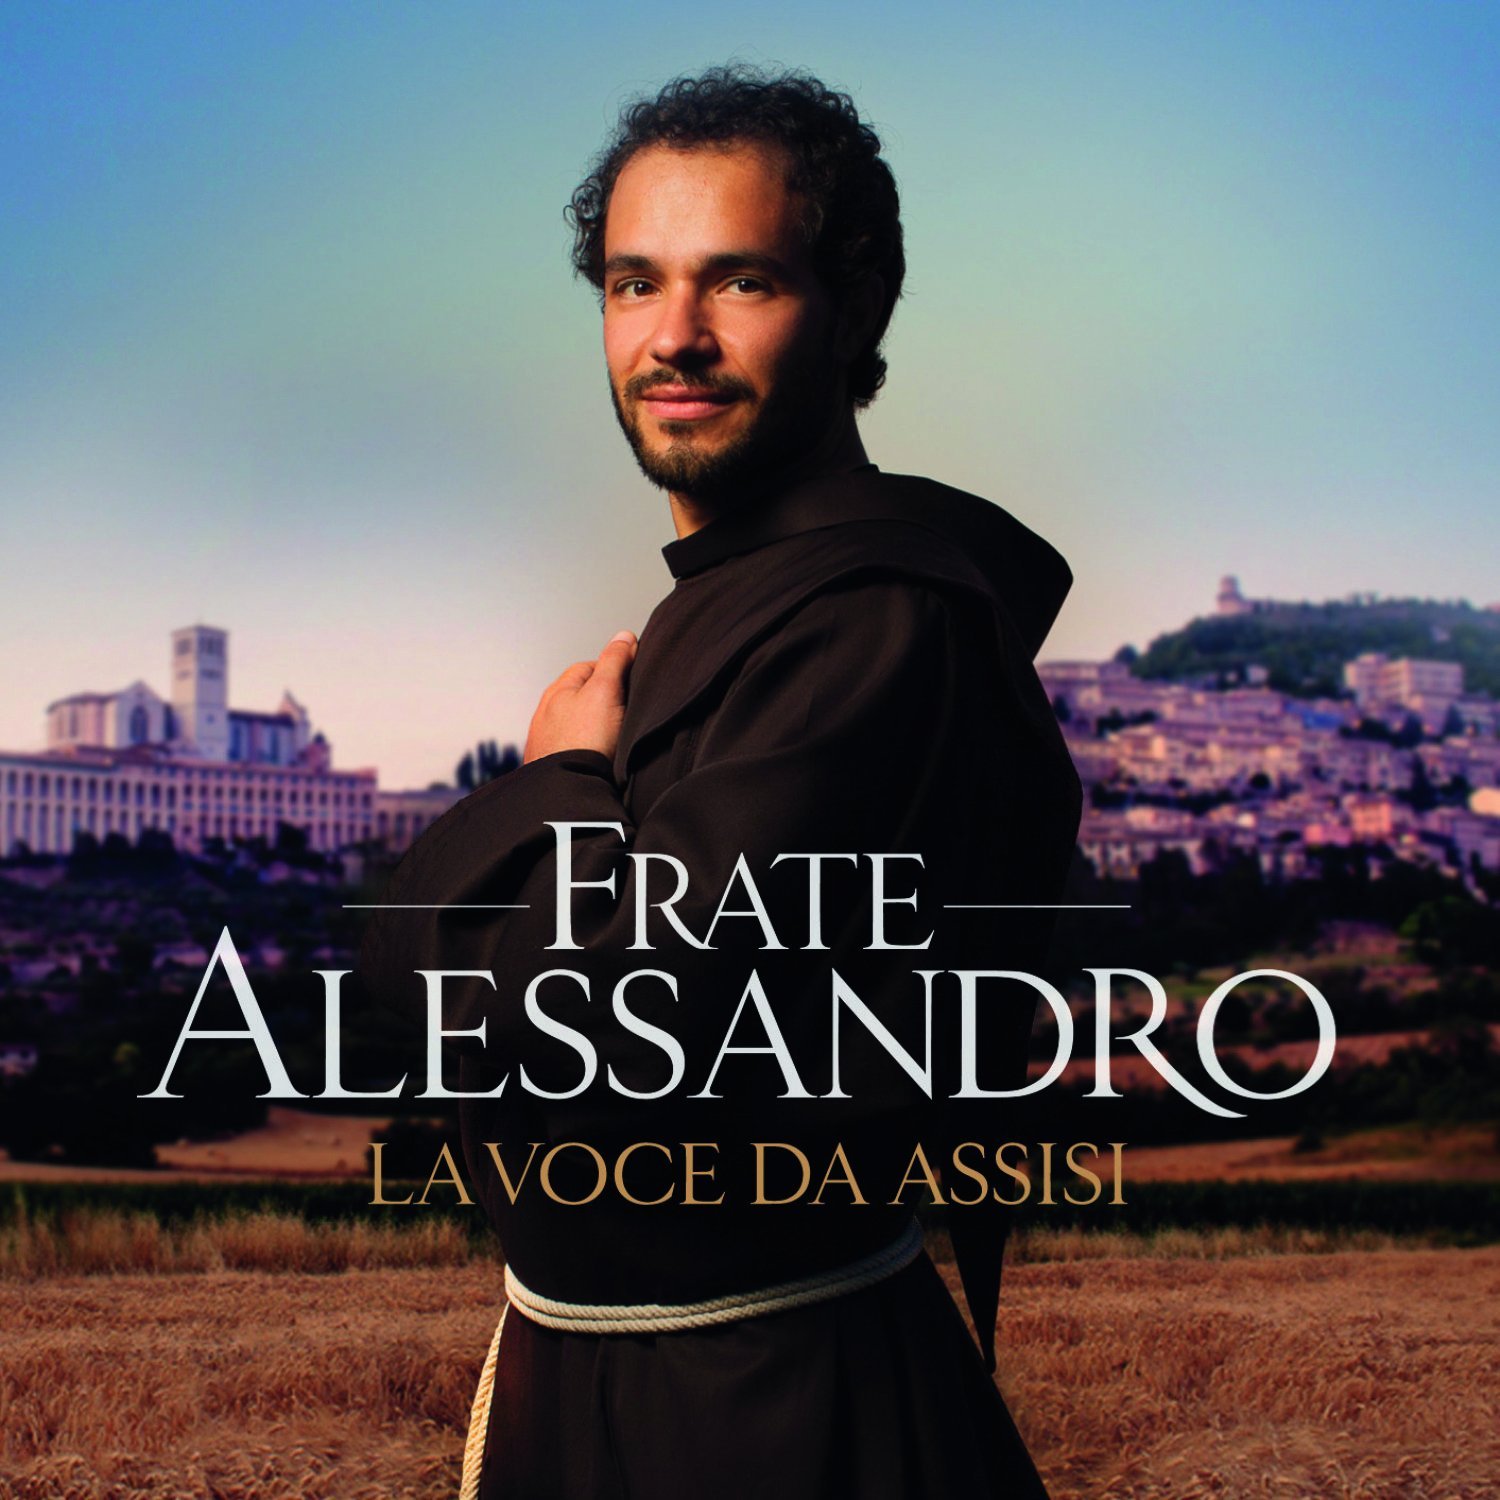 Friar Alessandro - Voice From Assisi (2012) [HDTracks FLAC 24bit/96kHz]